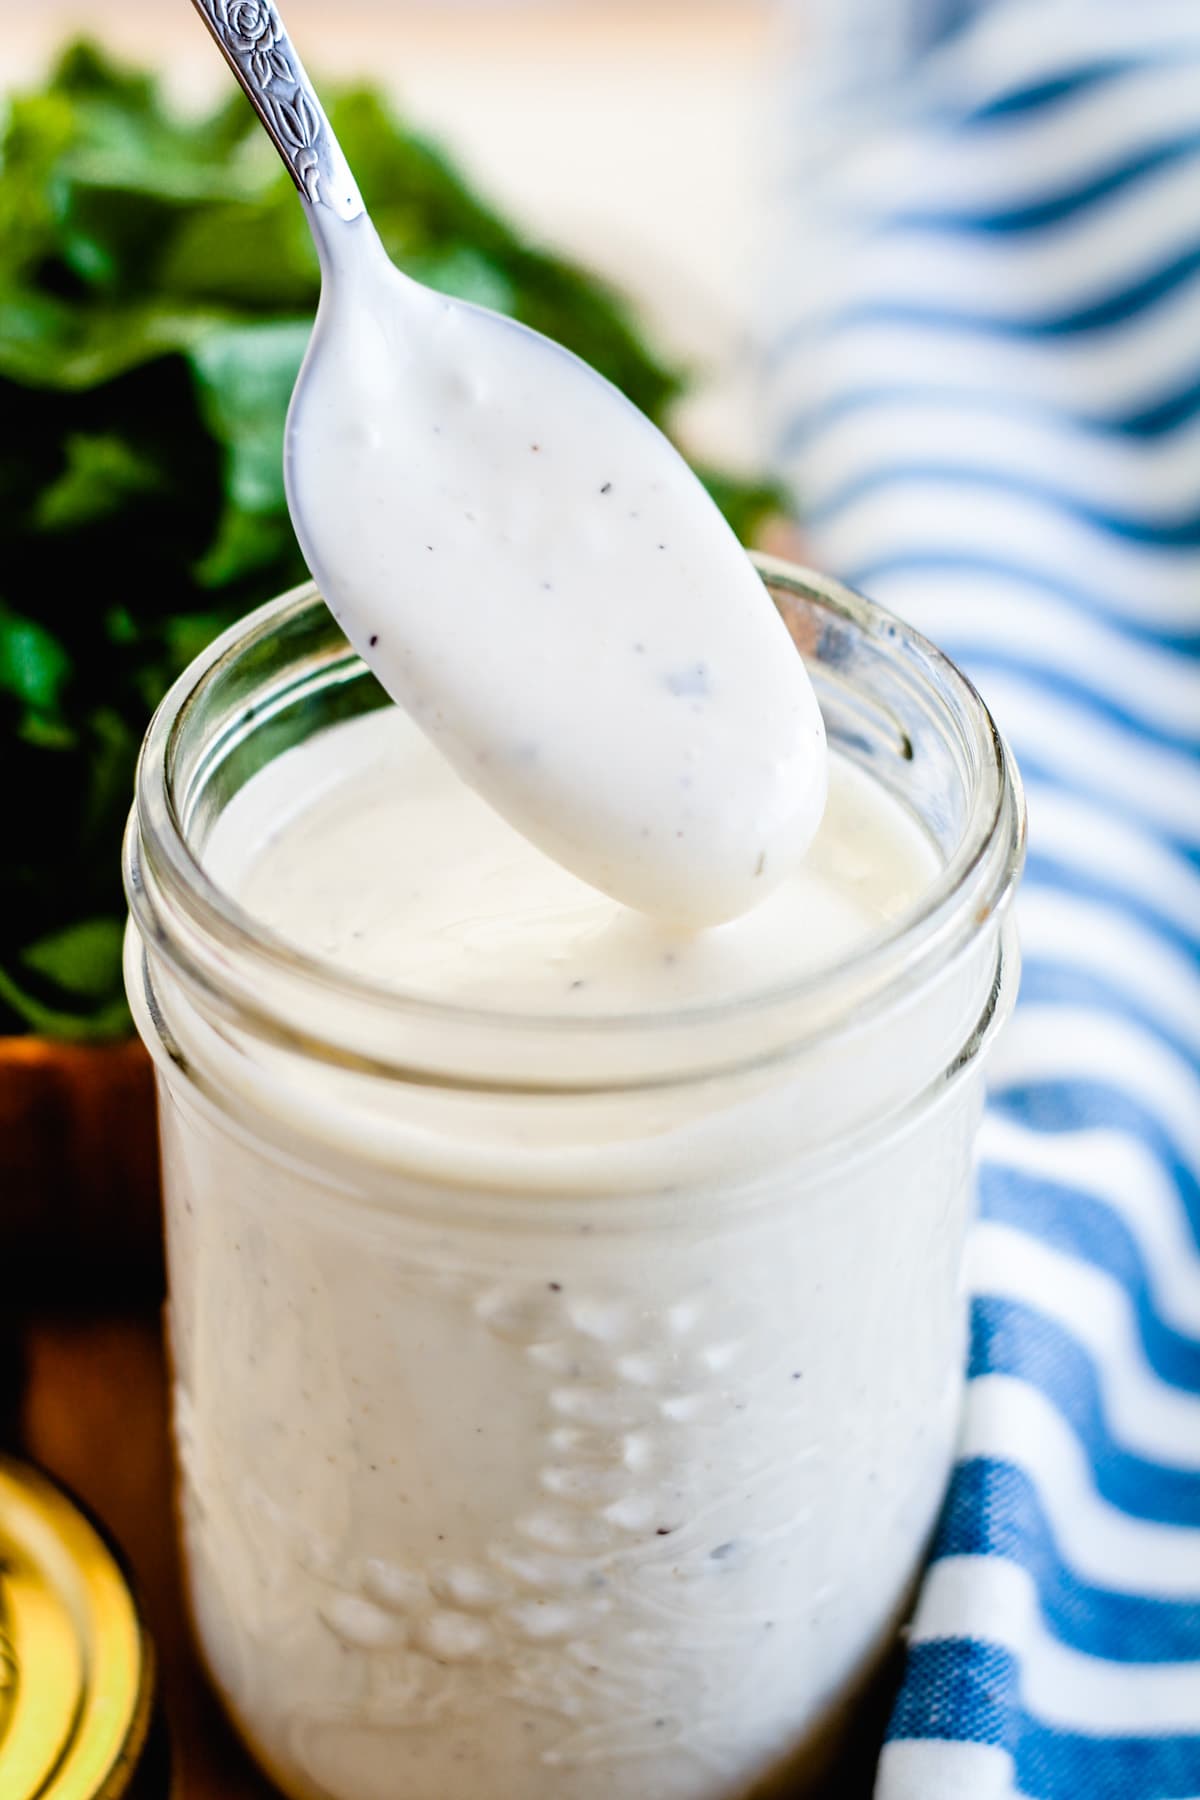 A spoon being dipped into a jar of homemade ranch dressing.